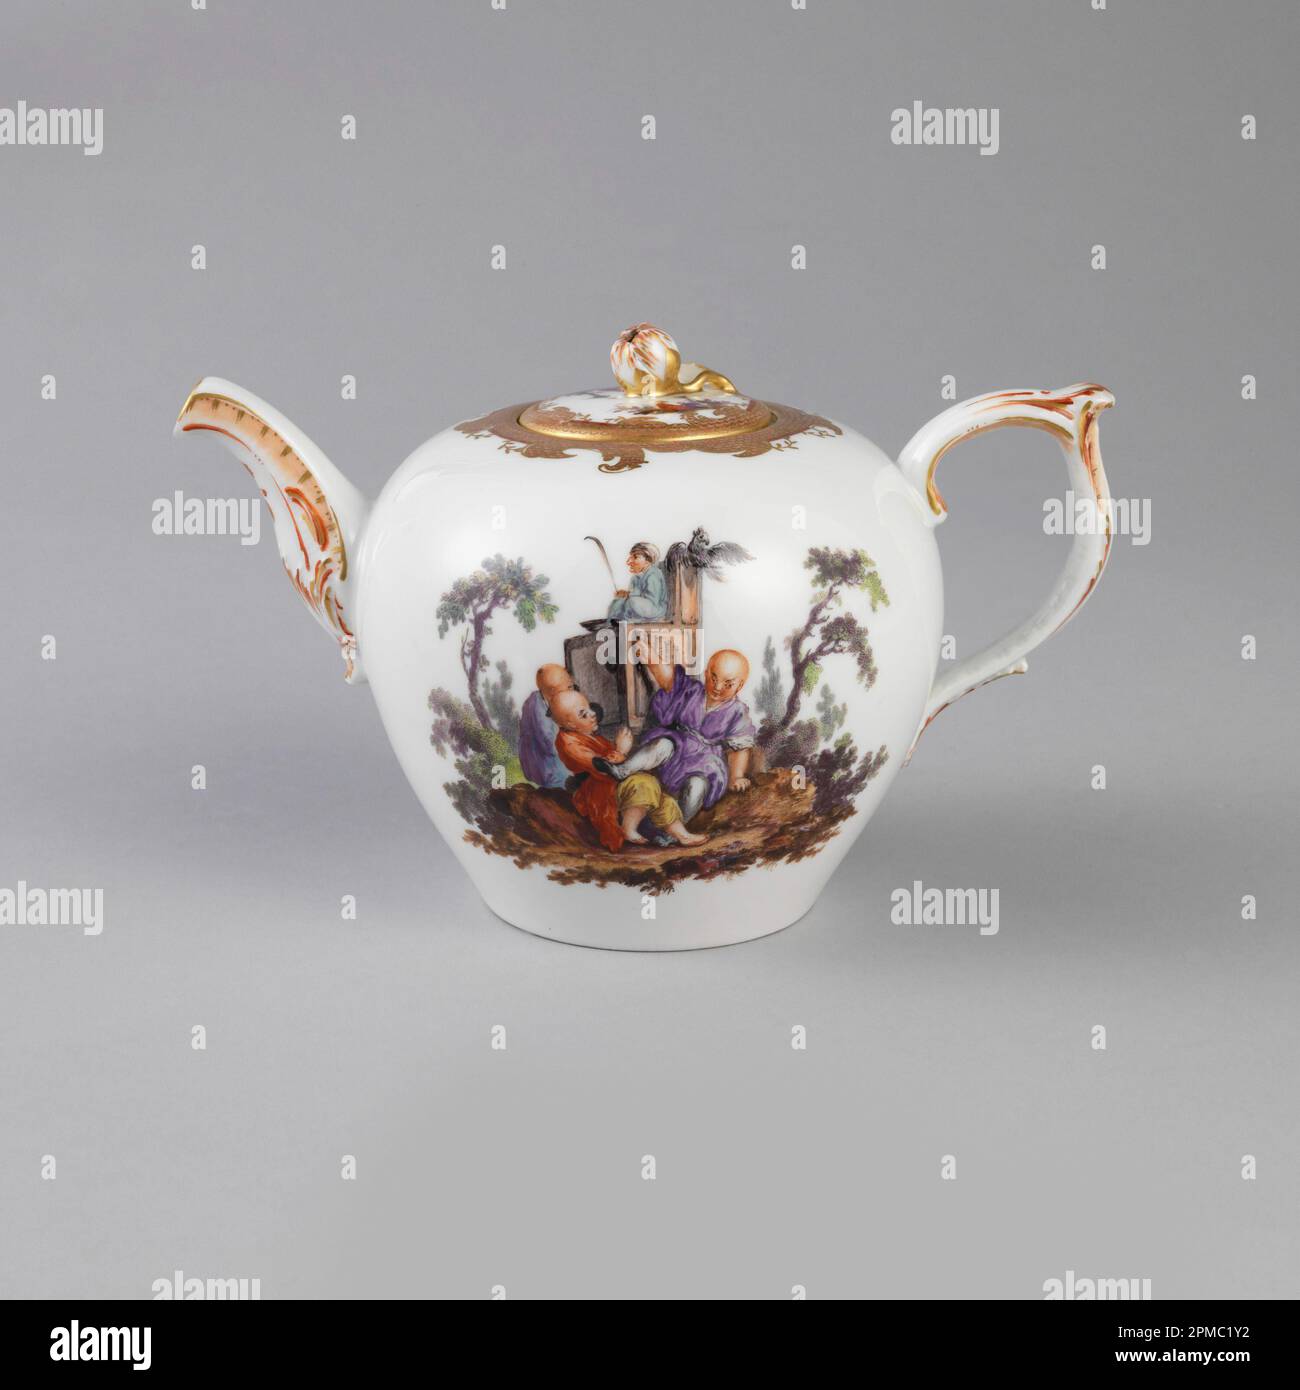 Teapot with Chinoiserie Vignettes Teapot; Manufactured by Royal Porcelain Manufactory, Berlin (Germany); Style of Jacques-Gabriel Huquier (French, 1730 - 1805), François Boucher (French, 1703–1770); Germany; hard paste porcelain, vitreous enamel, gold Stock Photo